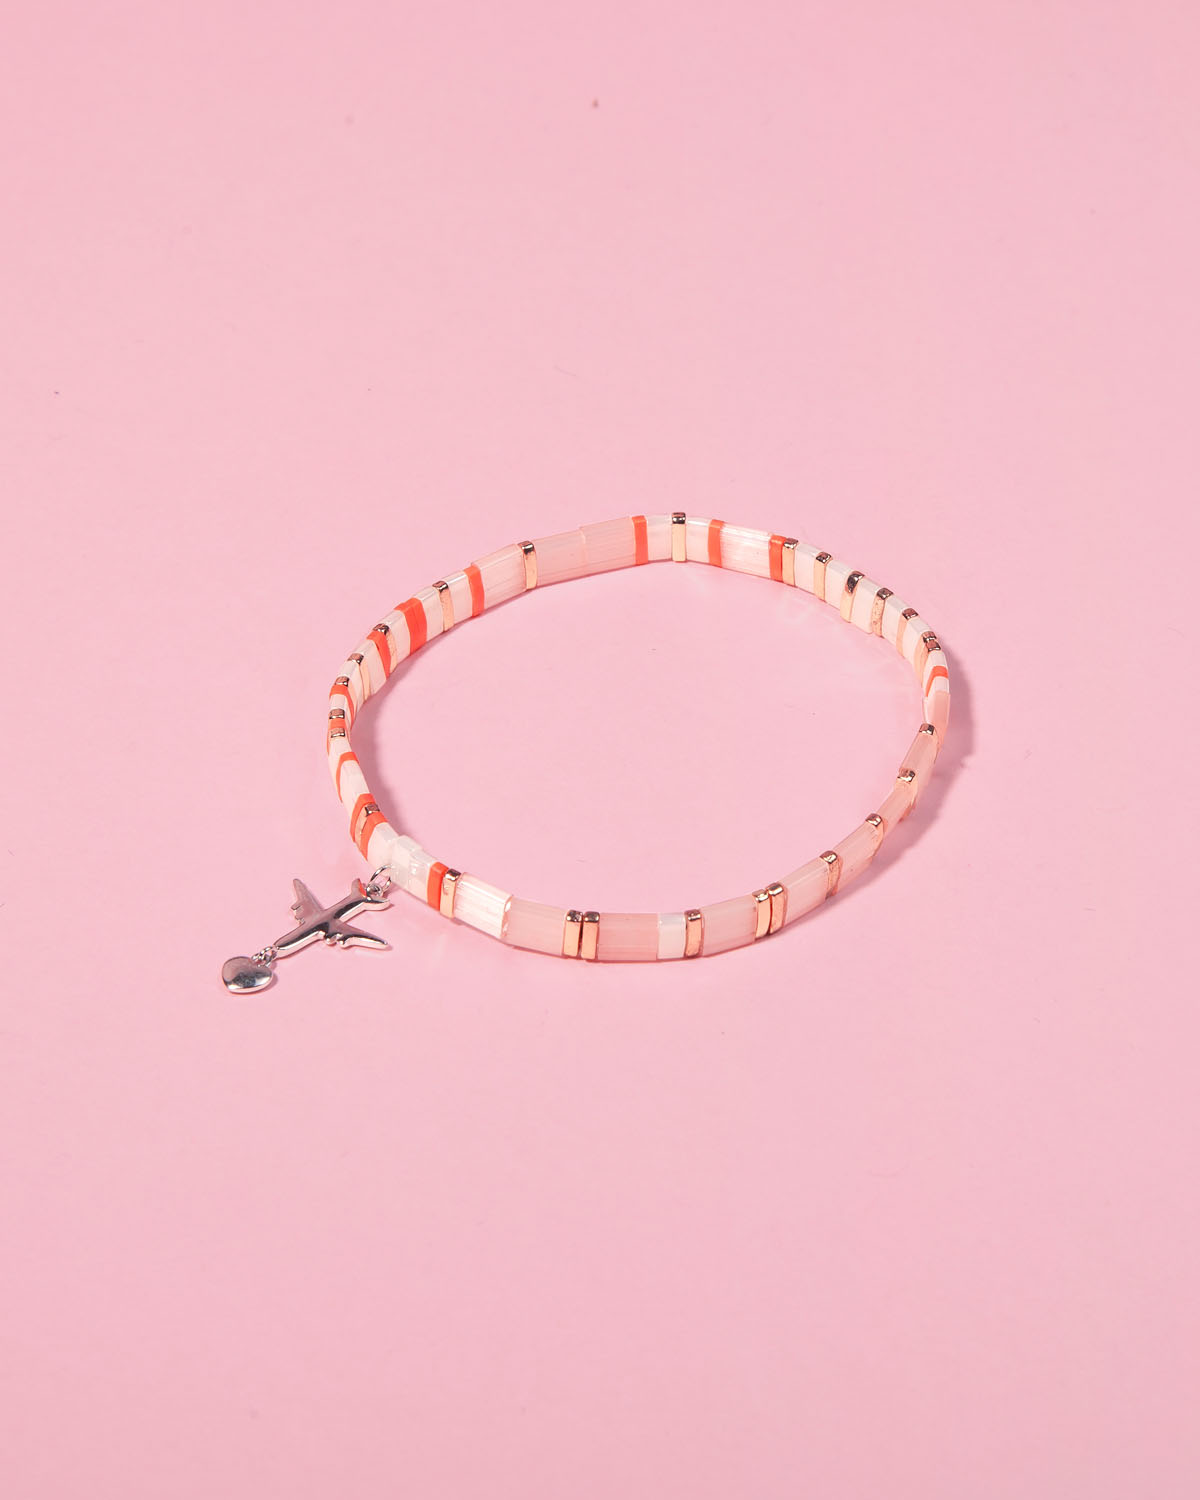 The Airplane Caramel Bracelet in Peach & Lychee from ZOLDI jewels shop